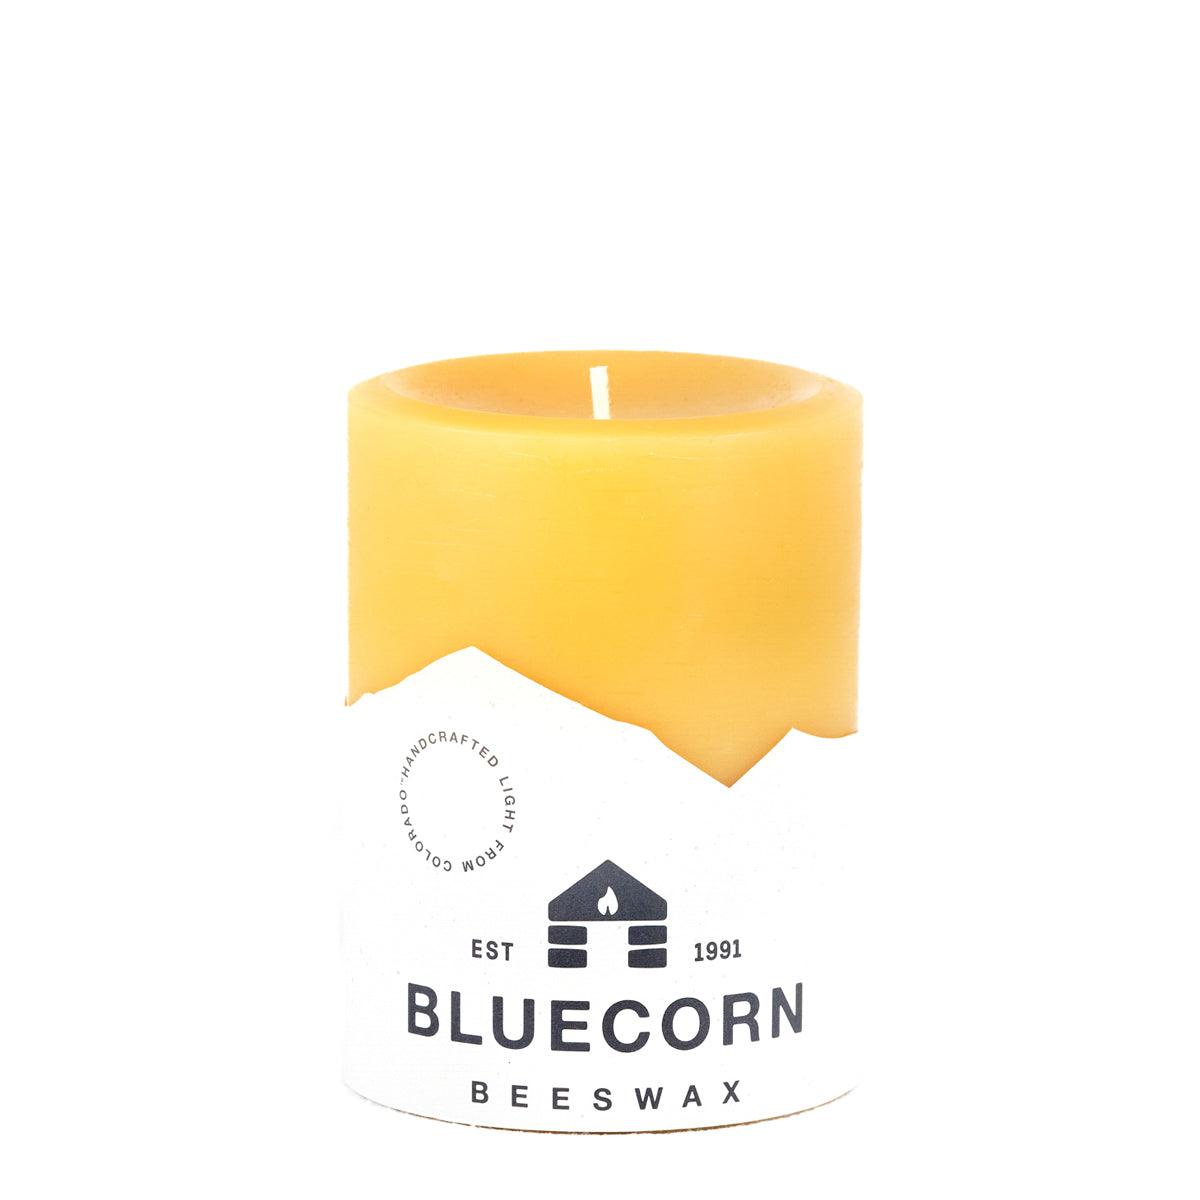 Bluecorn Beeswax 100% Pure Beeswax 3" x 4" Raw Pillar Candle. Burn Time: 60 hours. Made with 100% Pure Beeswax, is golden in color, with a light honey scent. Made with 100% pure cotton wick, no lead and paraffin free. Clean burning and non-toxic. Features Bluecorn Beeswax label printed on 100% recycled paper.